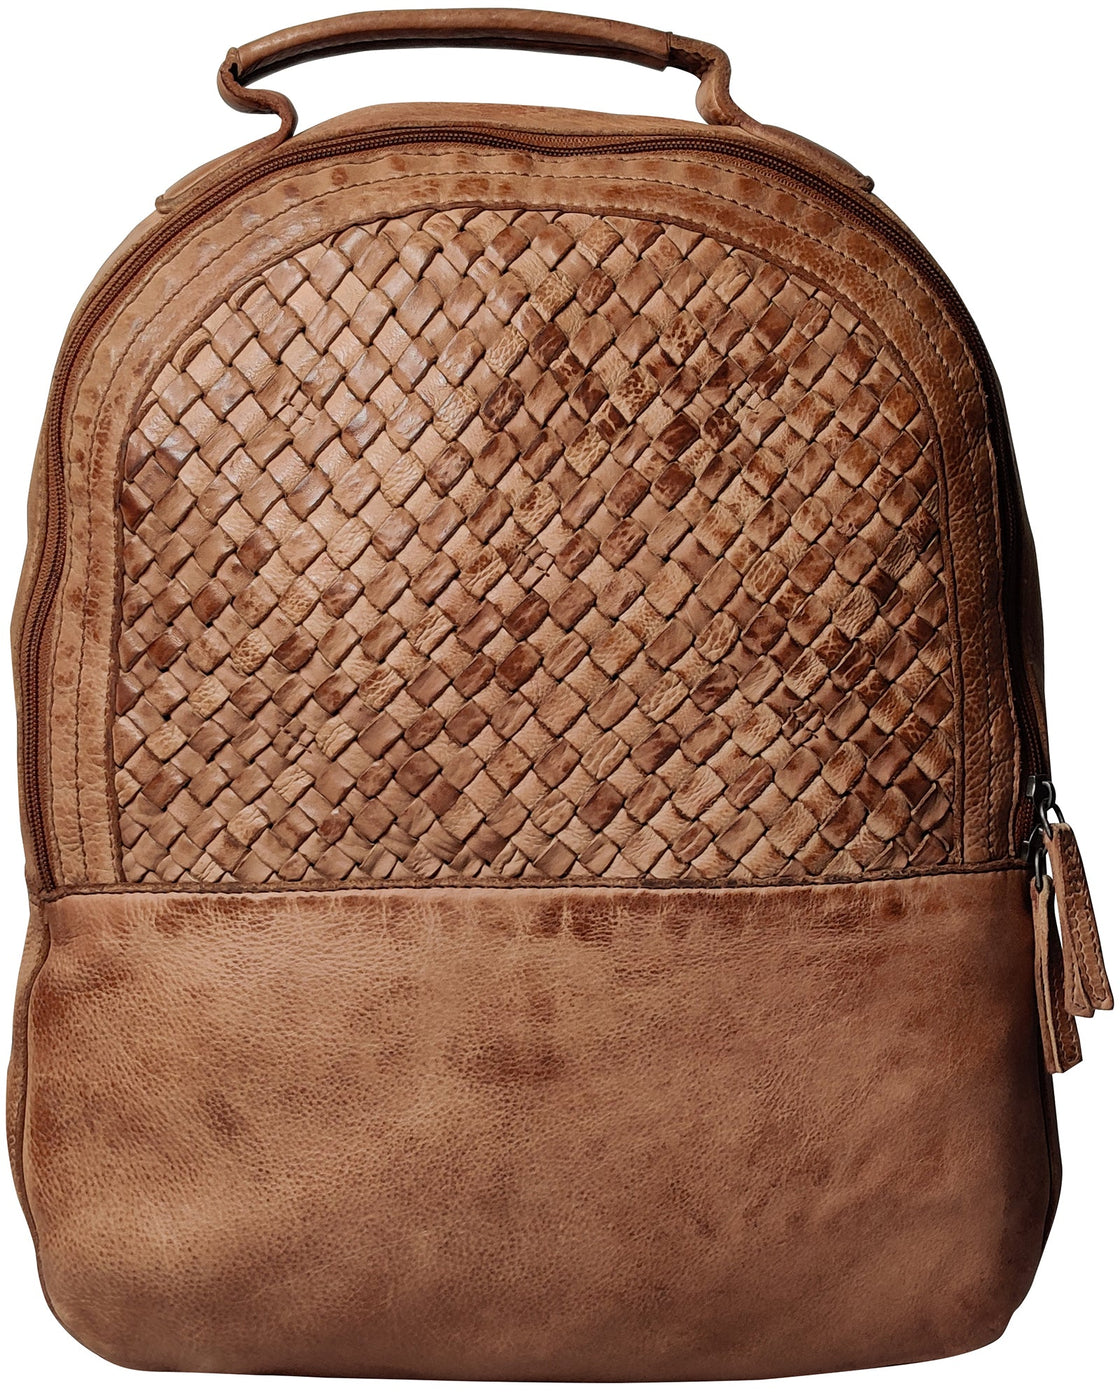 Leather Laptop Backpack for Women, Cognac